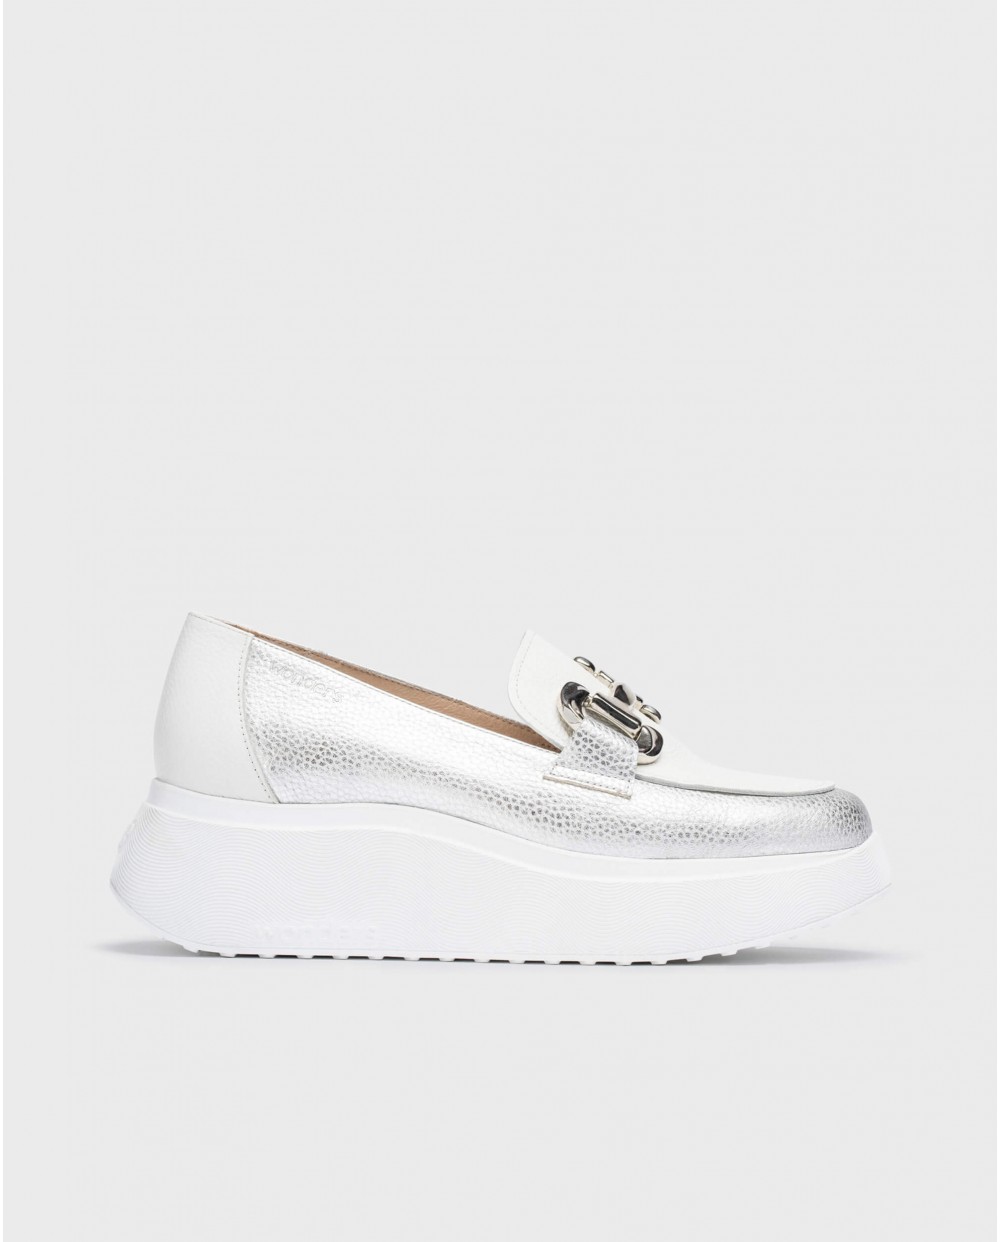 Wonders-Loafers-Silver Montreal Moccasin